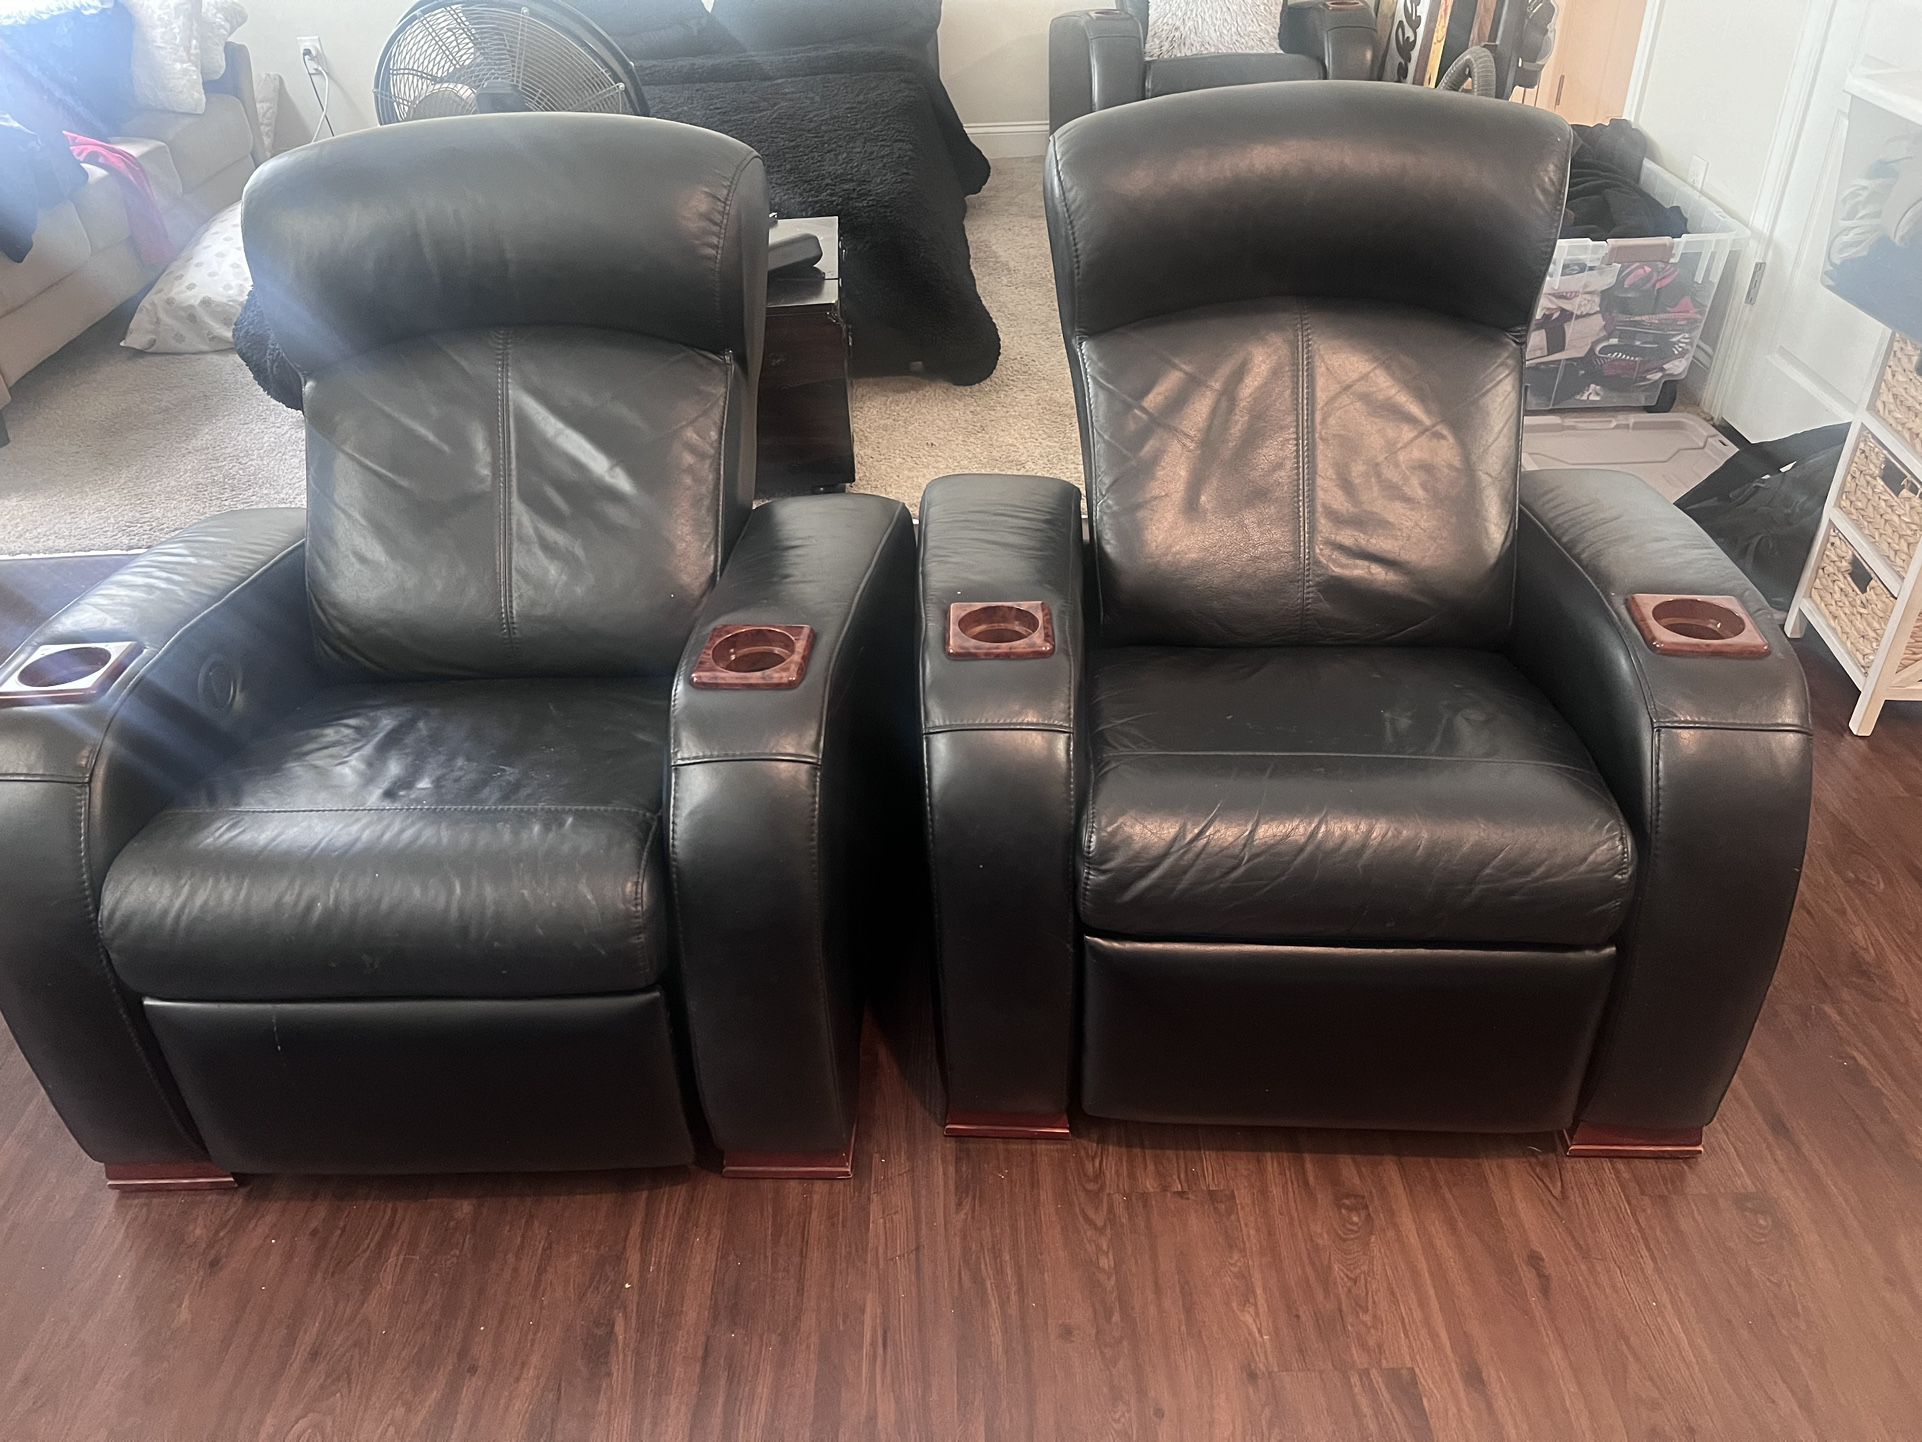 Selling 3 Leather Reclining Chairs